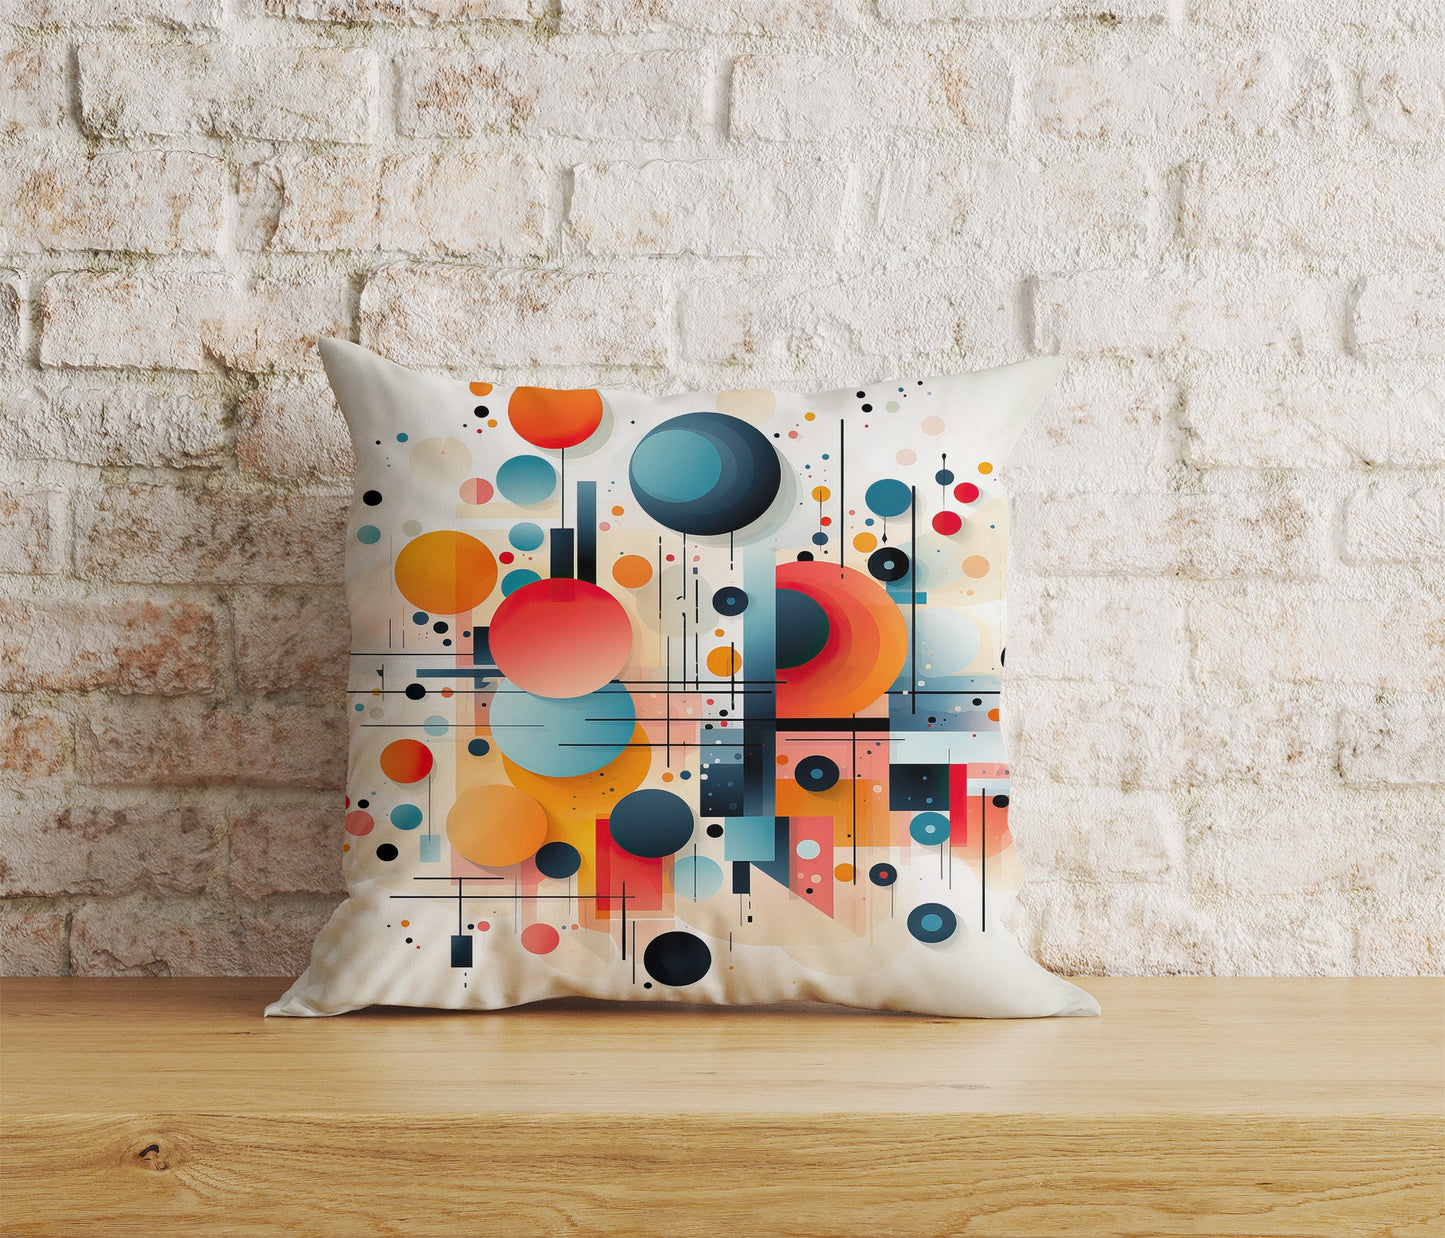 Abstract Colorful Cushion Cover Bedroom Pillow Cover